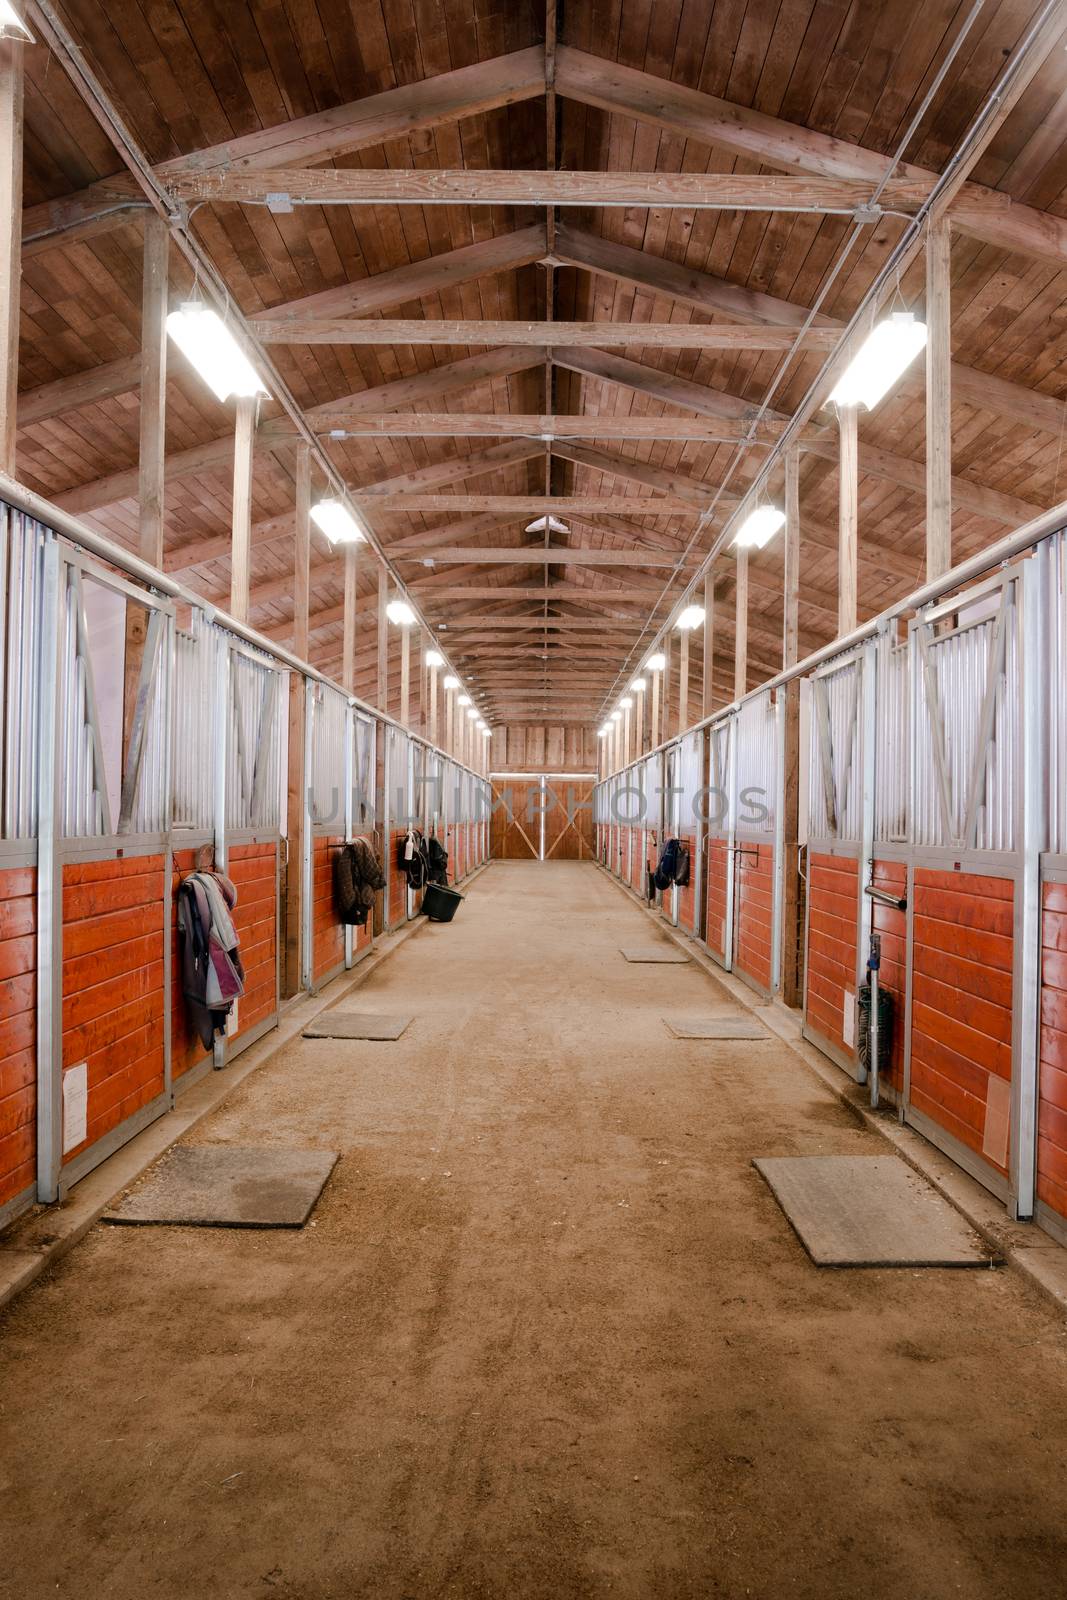 The center path through a horse barn light at the end of the tunnel